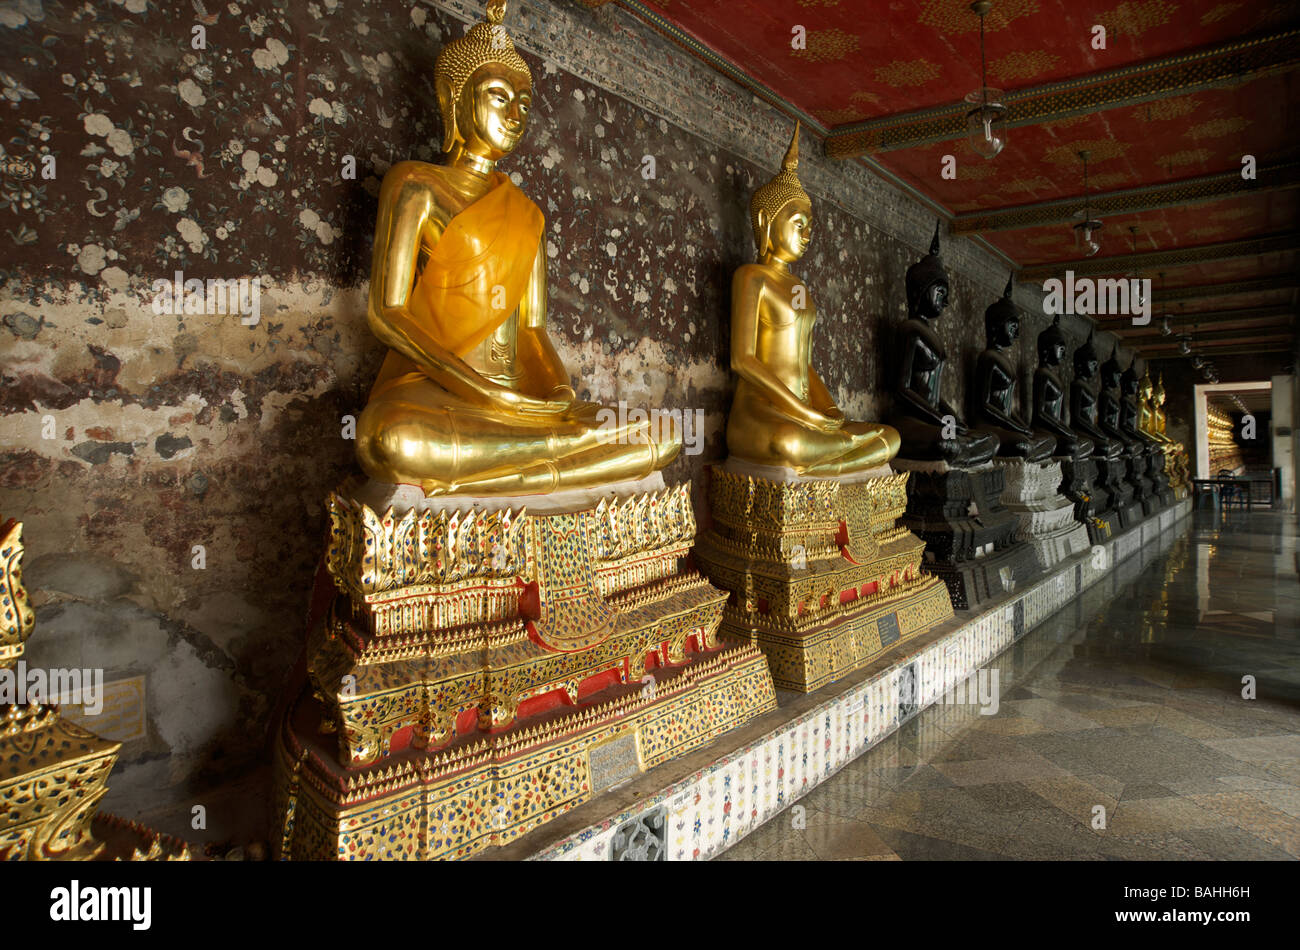 A row of black and gold Buddha statues line the galleries at Wat Suthat temple in Bangkok Thailand Stock Photo